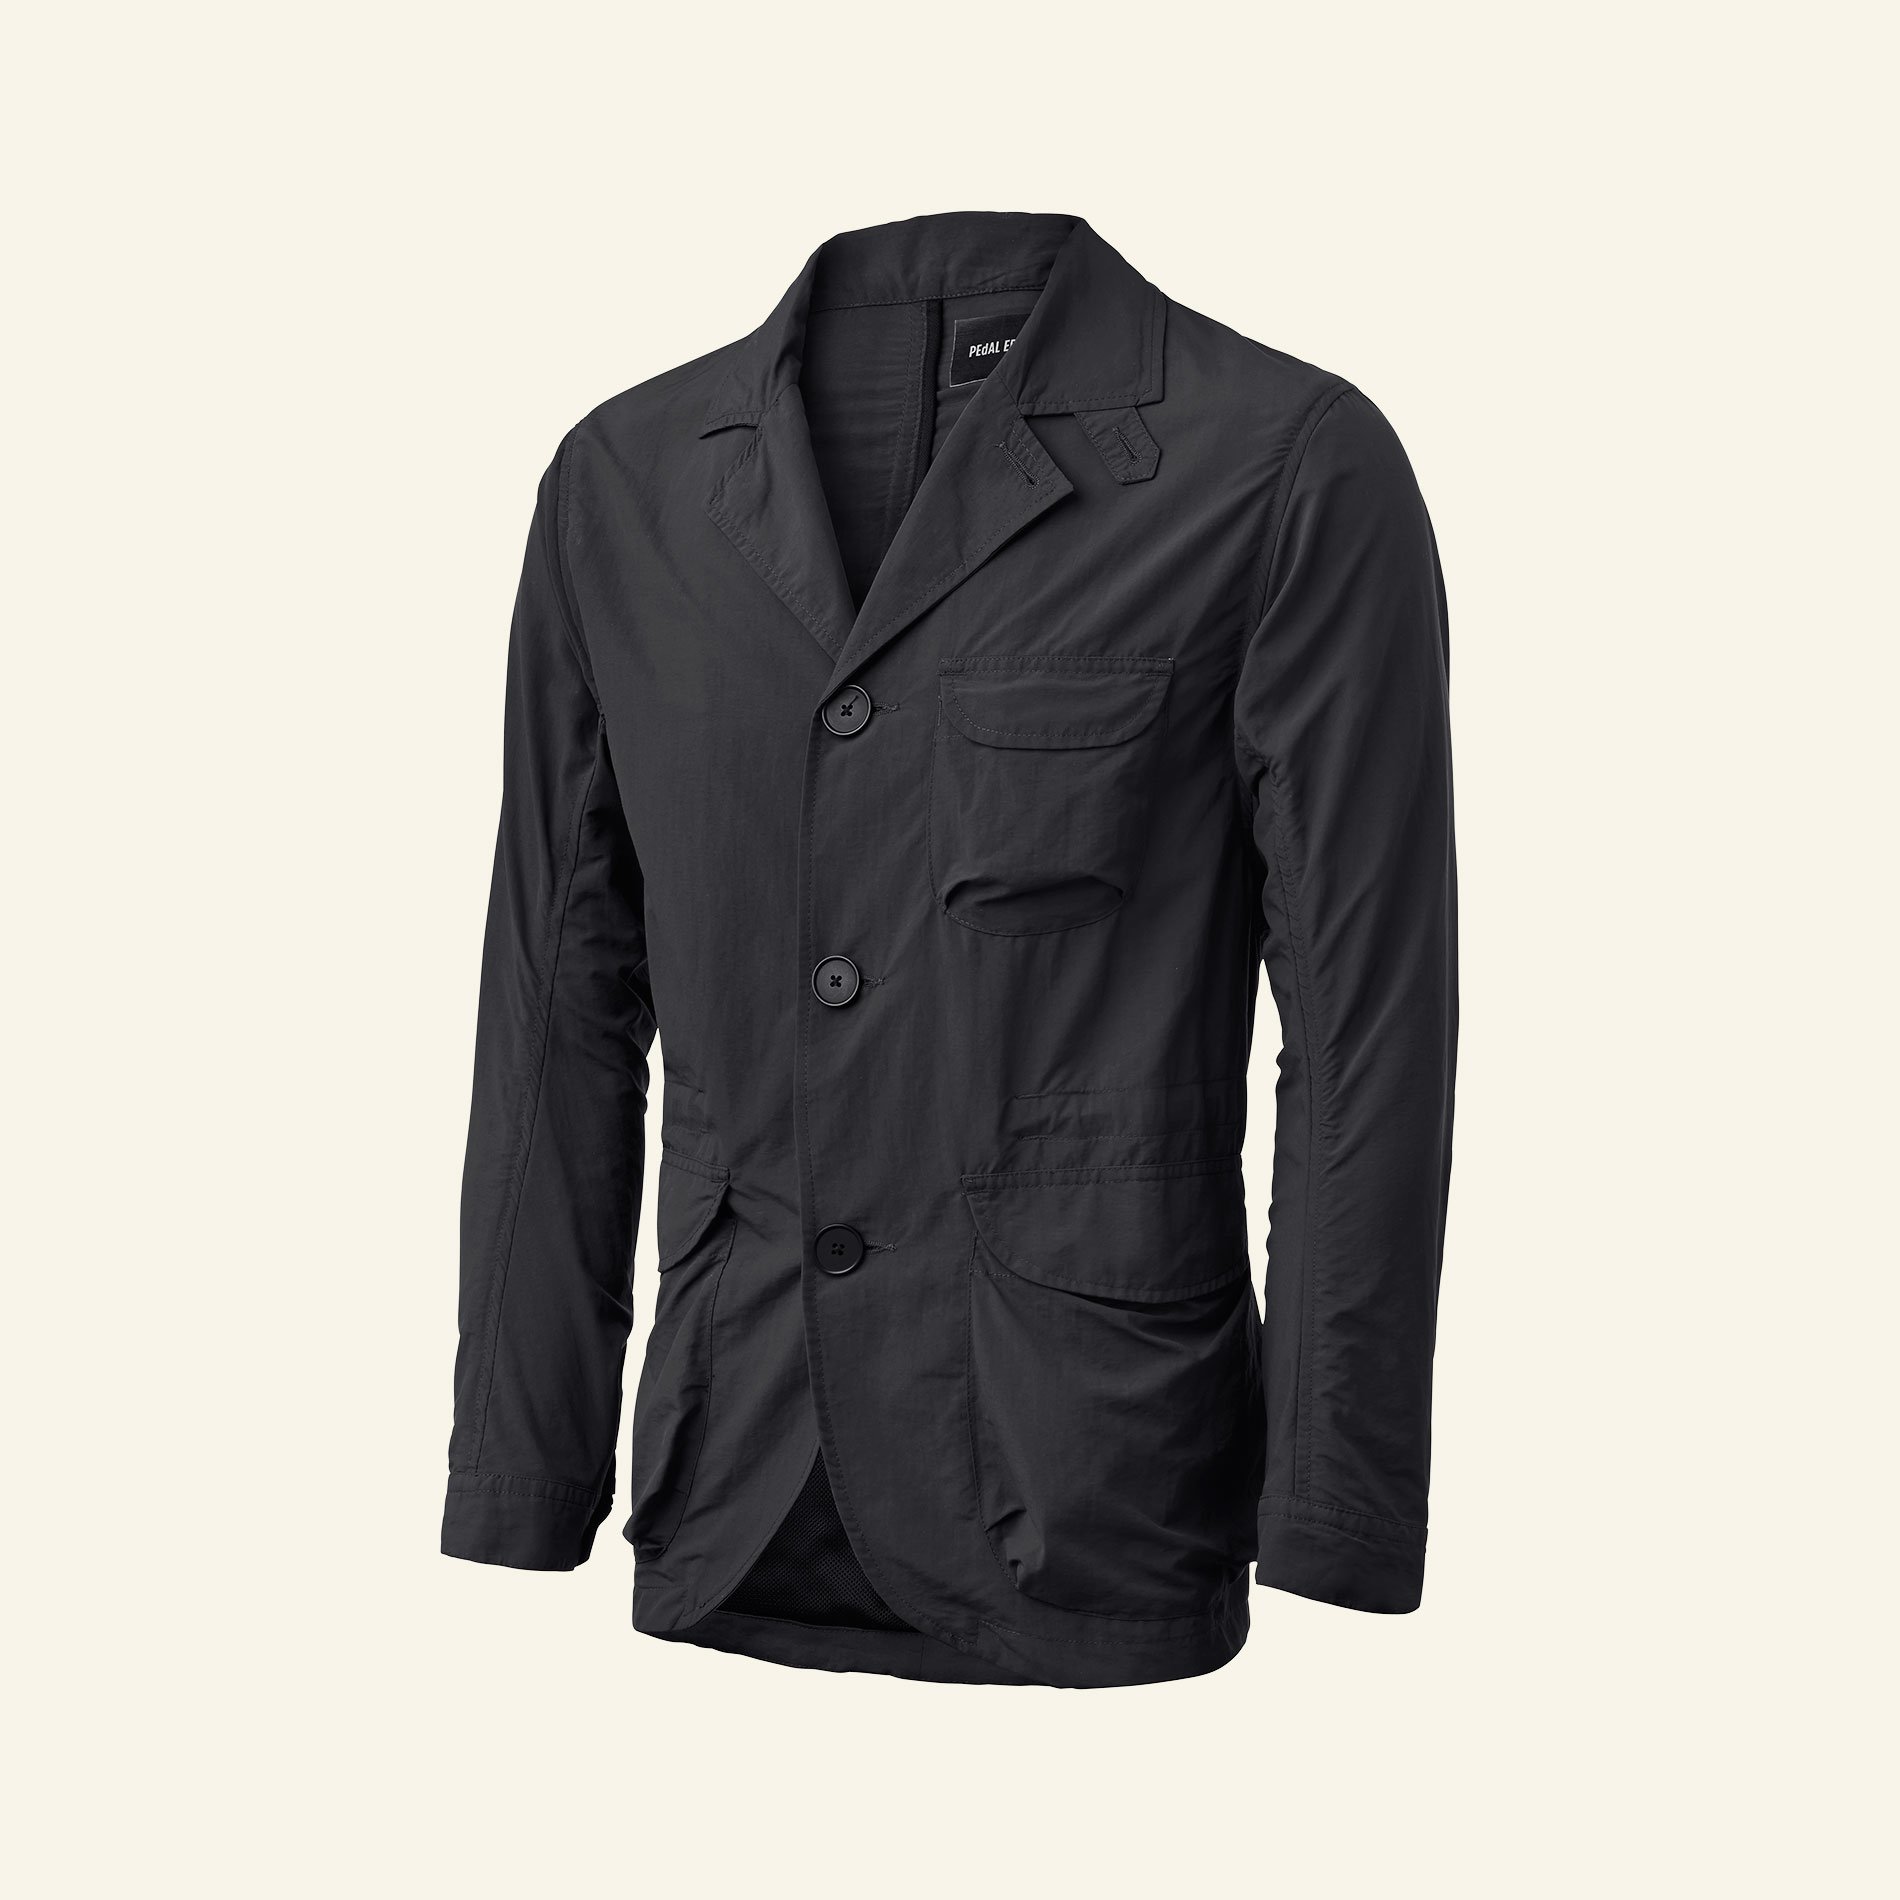 Packable PEdAL ED Jackets Ideal for Spring Cycling